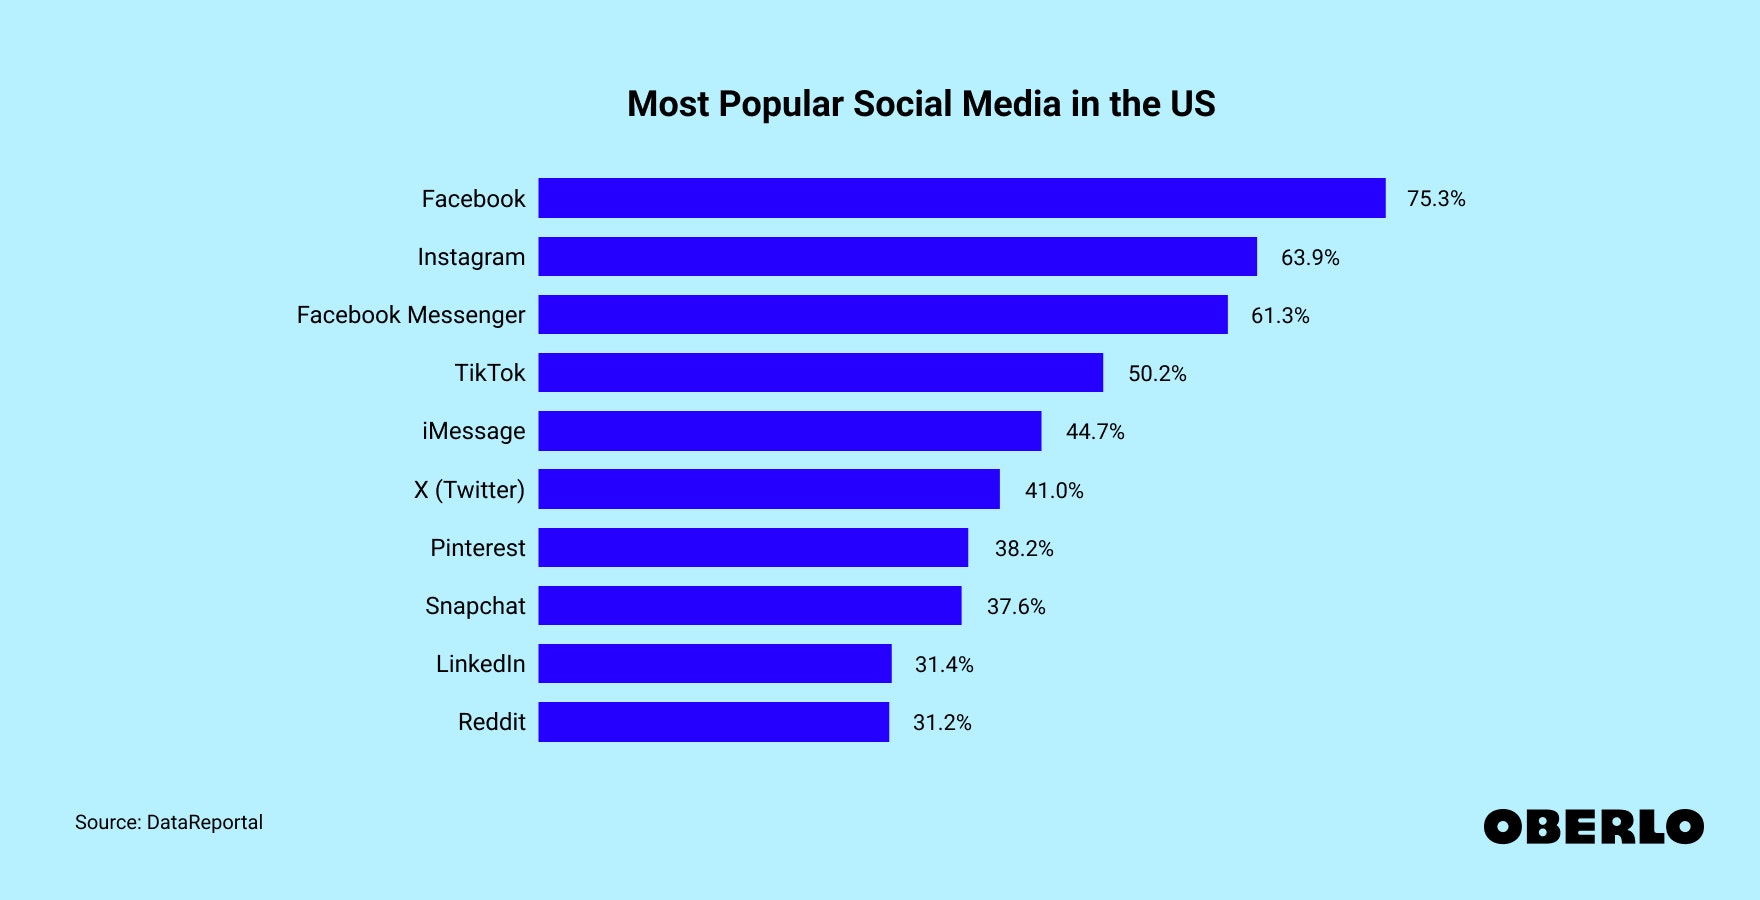 Chart showing the Most Popular Social Media platforms in the US